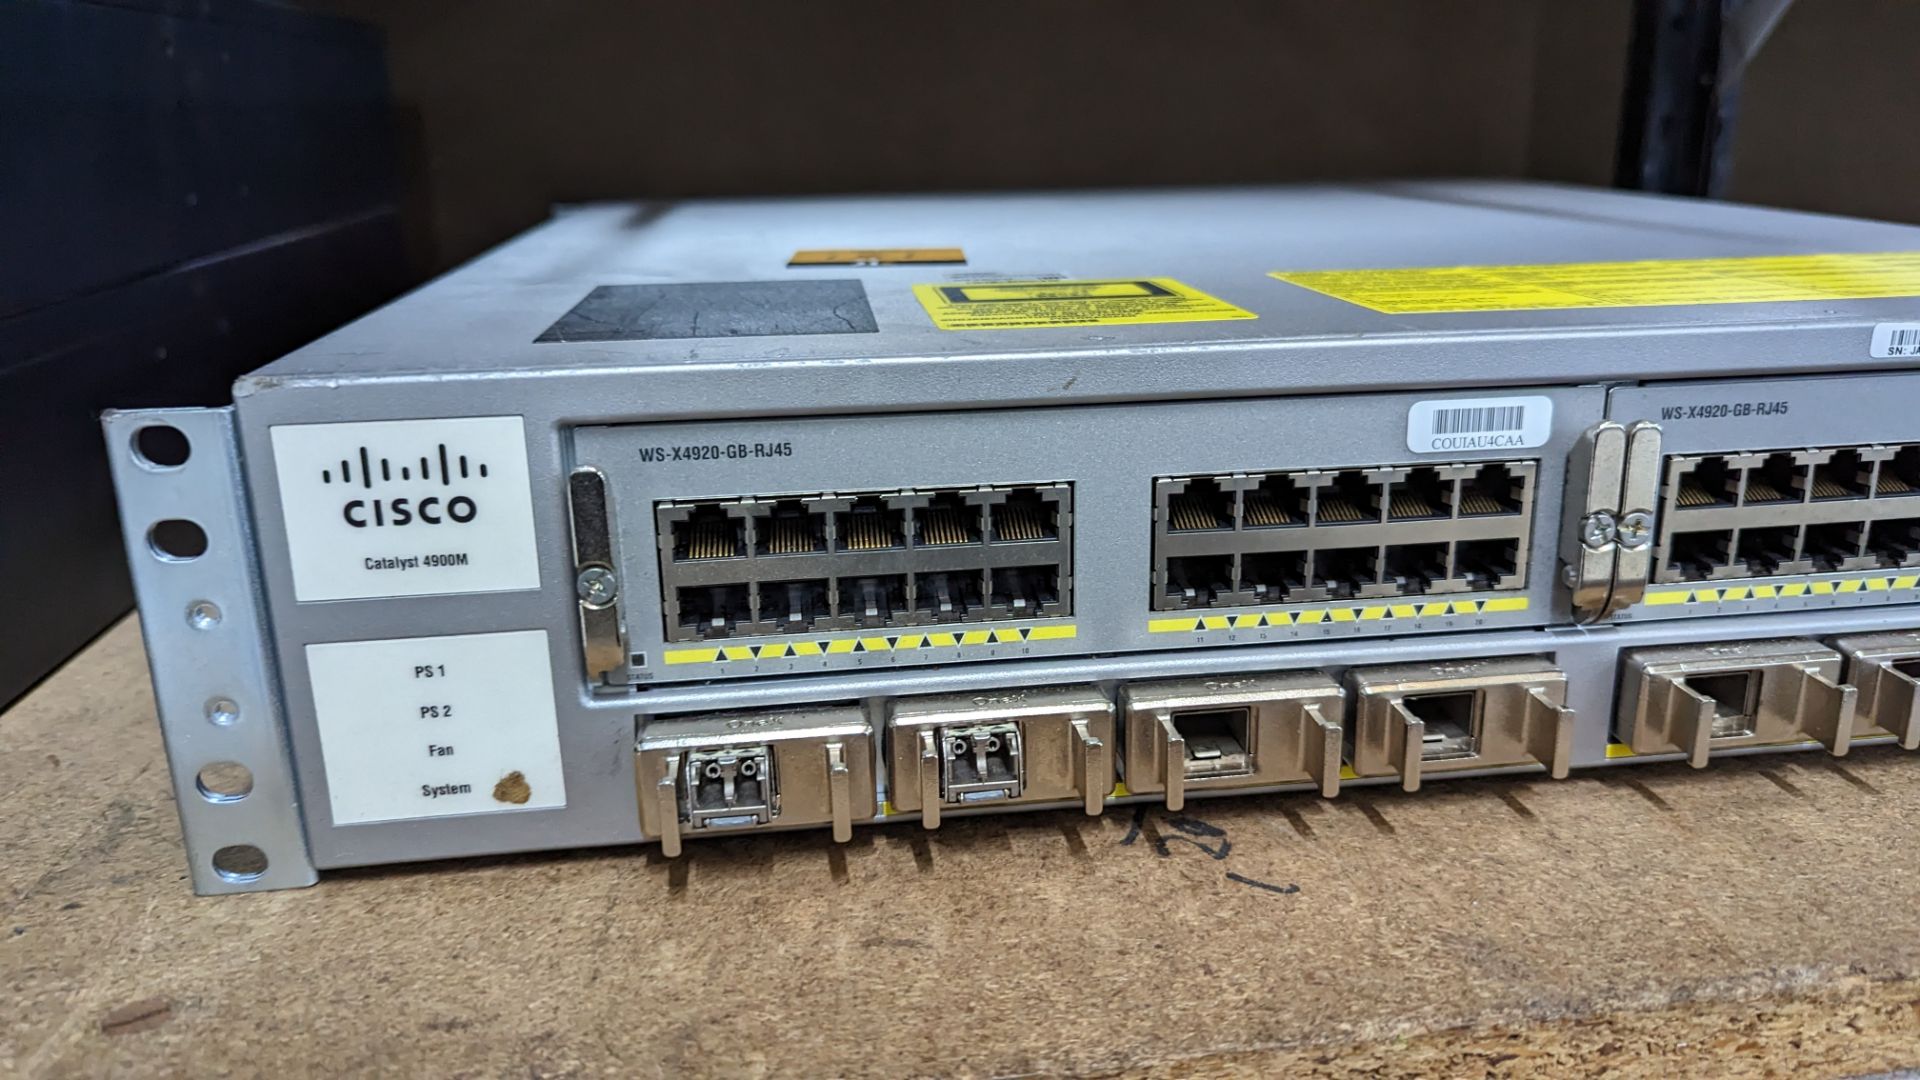 Cisco Catalyst 4900M model WS-C4900M switch with 2 off WS-X4920-GB-12J45 modules - Image 3 of 7